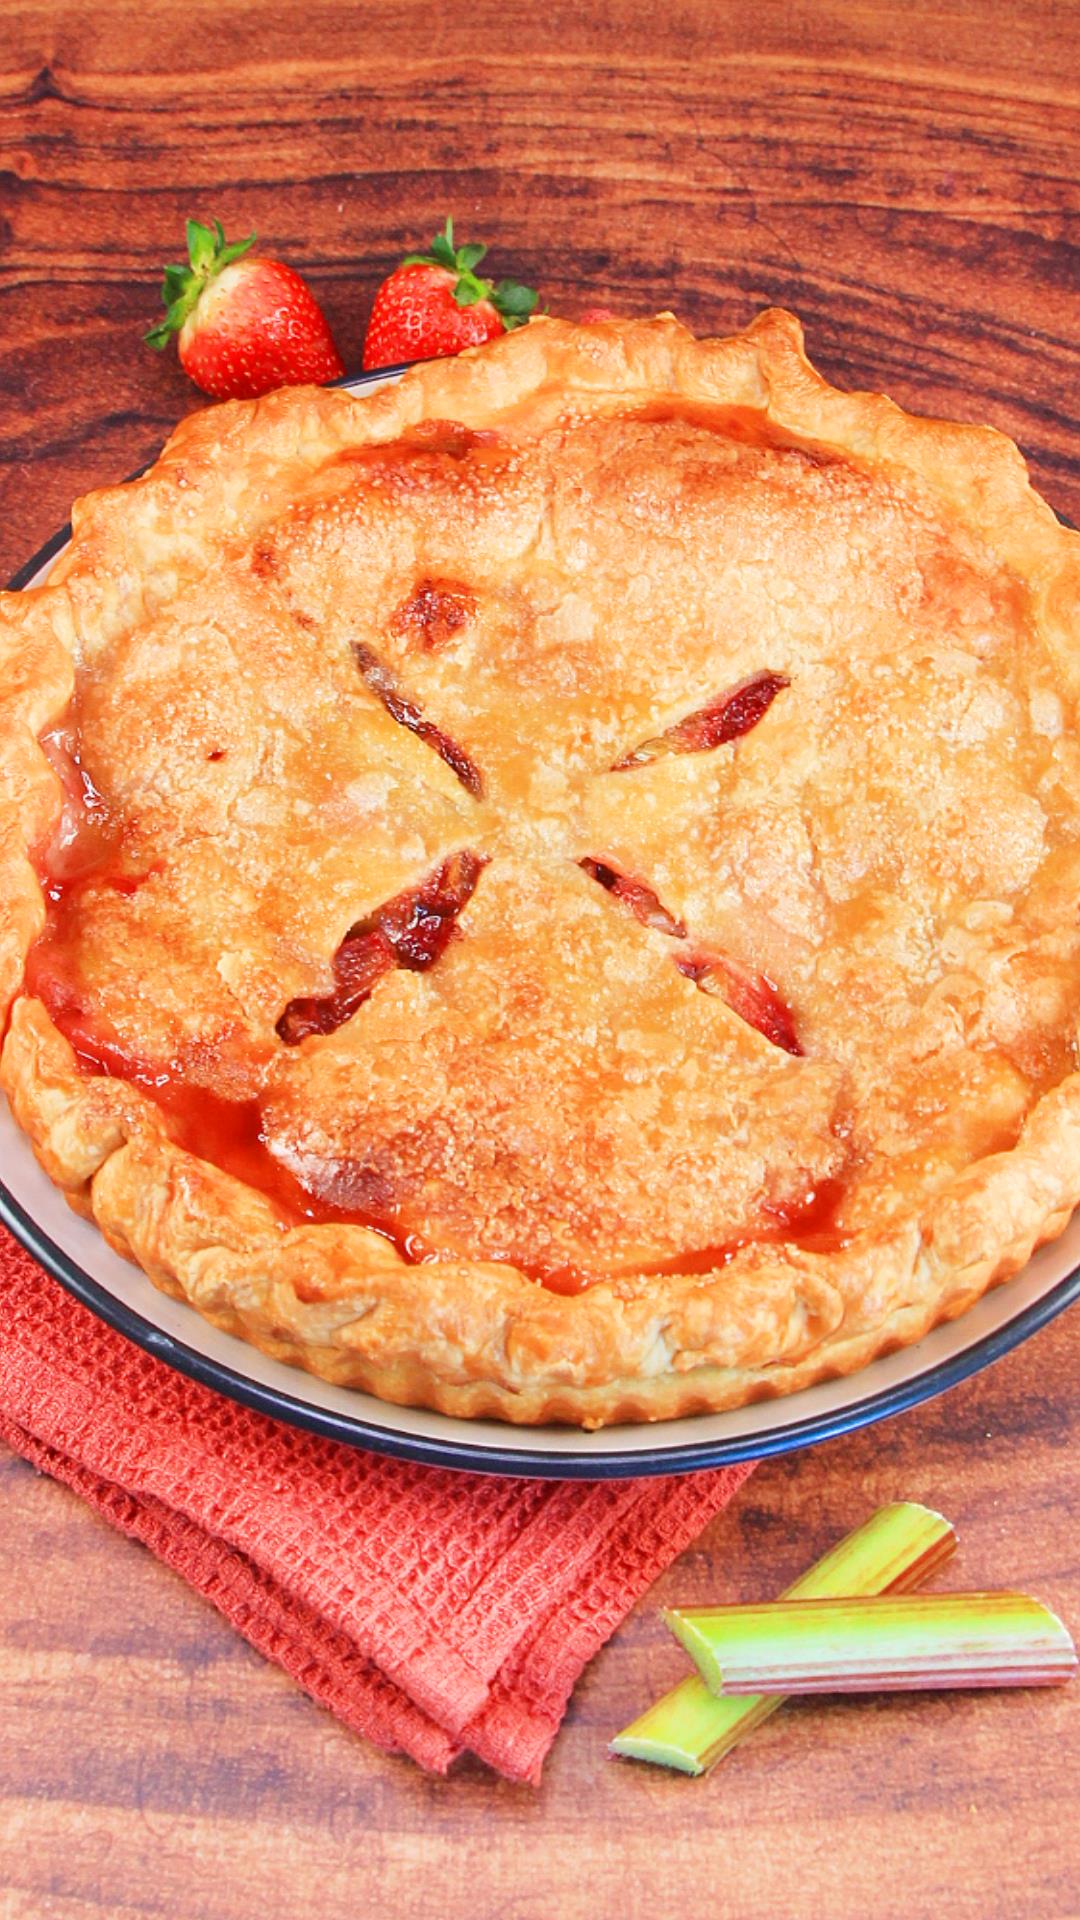 Sideview of a baked golden brown pie with strawberry and rhubarb juice bubbled around the edges - Hostess At Heart